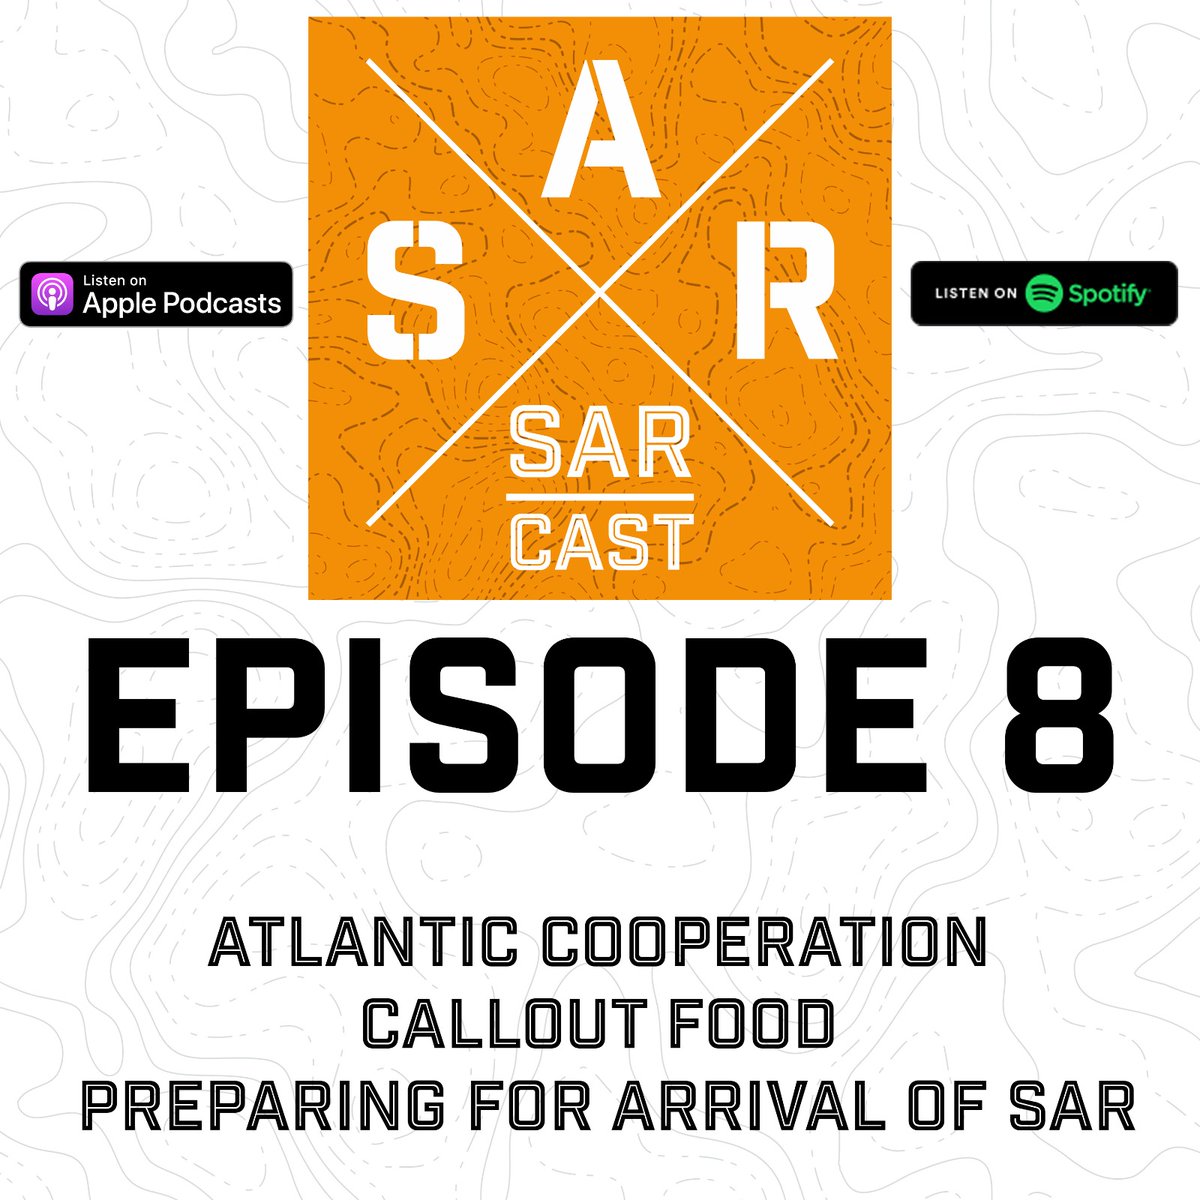 Callout food SAR Atlantic cooperation.Topic how to prepare for rescue by SAR and the info teams need to prepare for the search. Visit the sarcast website for better show notes #searchandrescue #coastguard  #calloutfood #sarcast #SAR #preparation #planning #PLB #Herbertprotocol